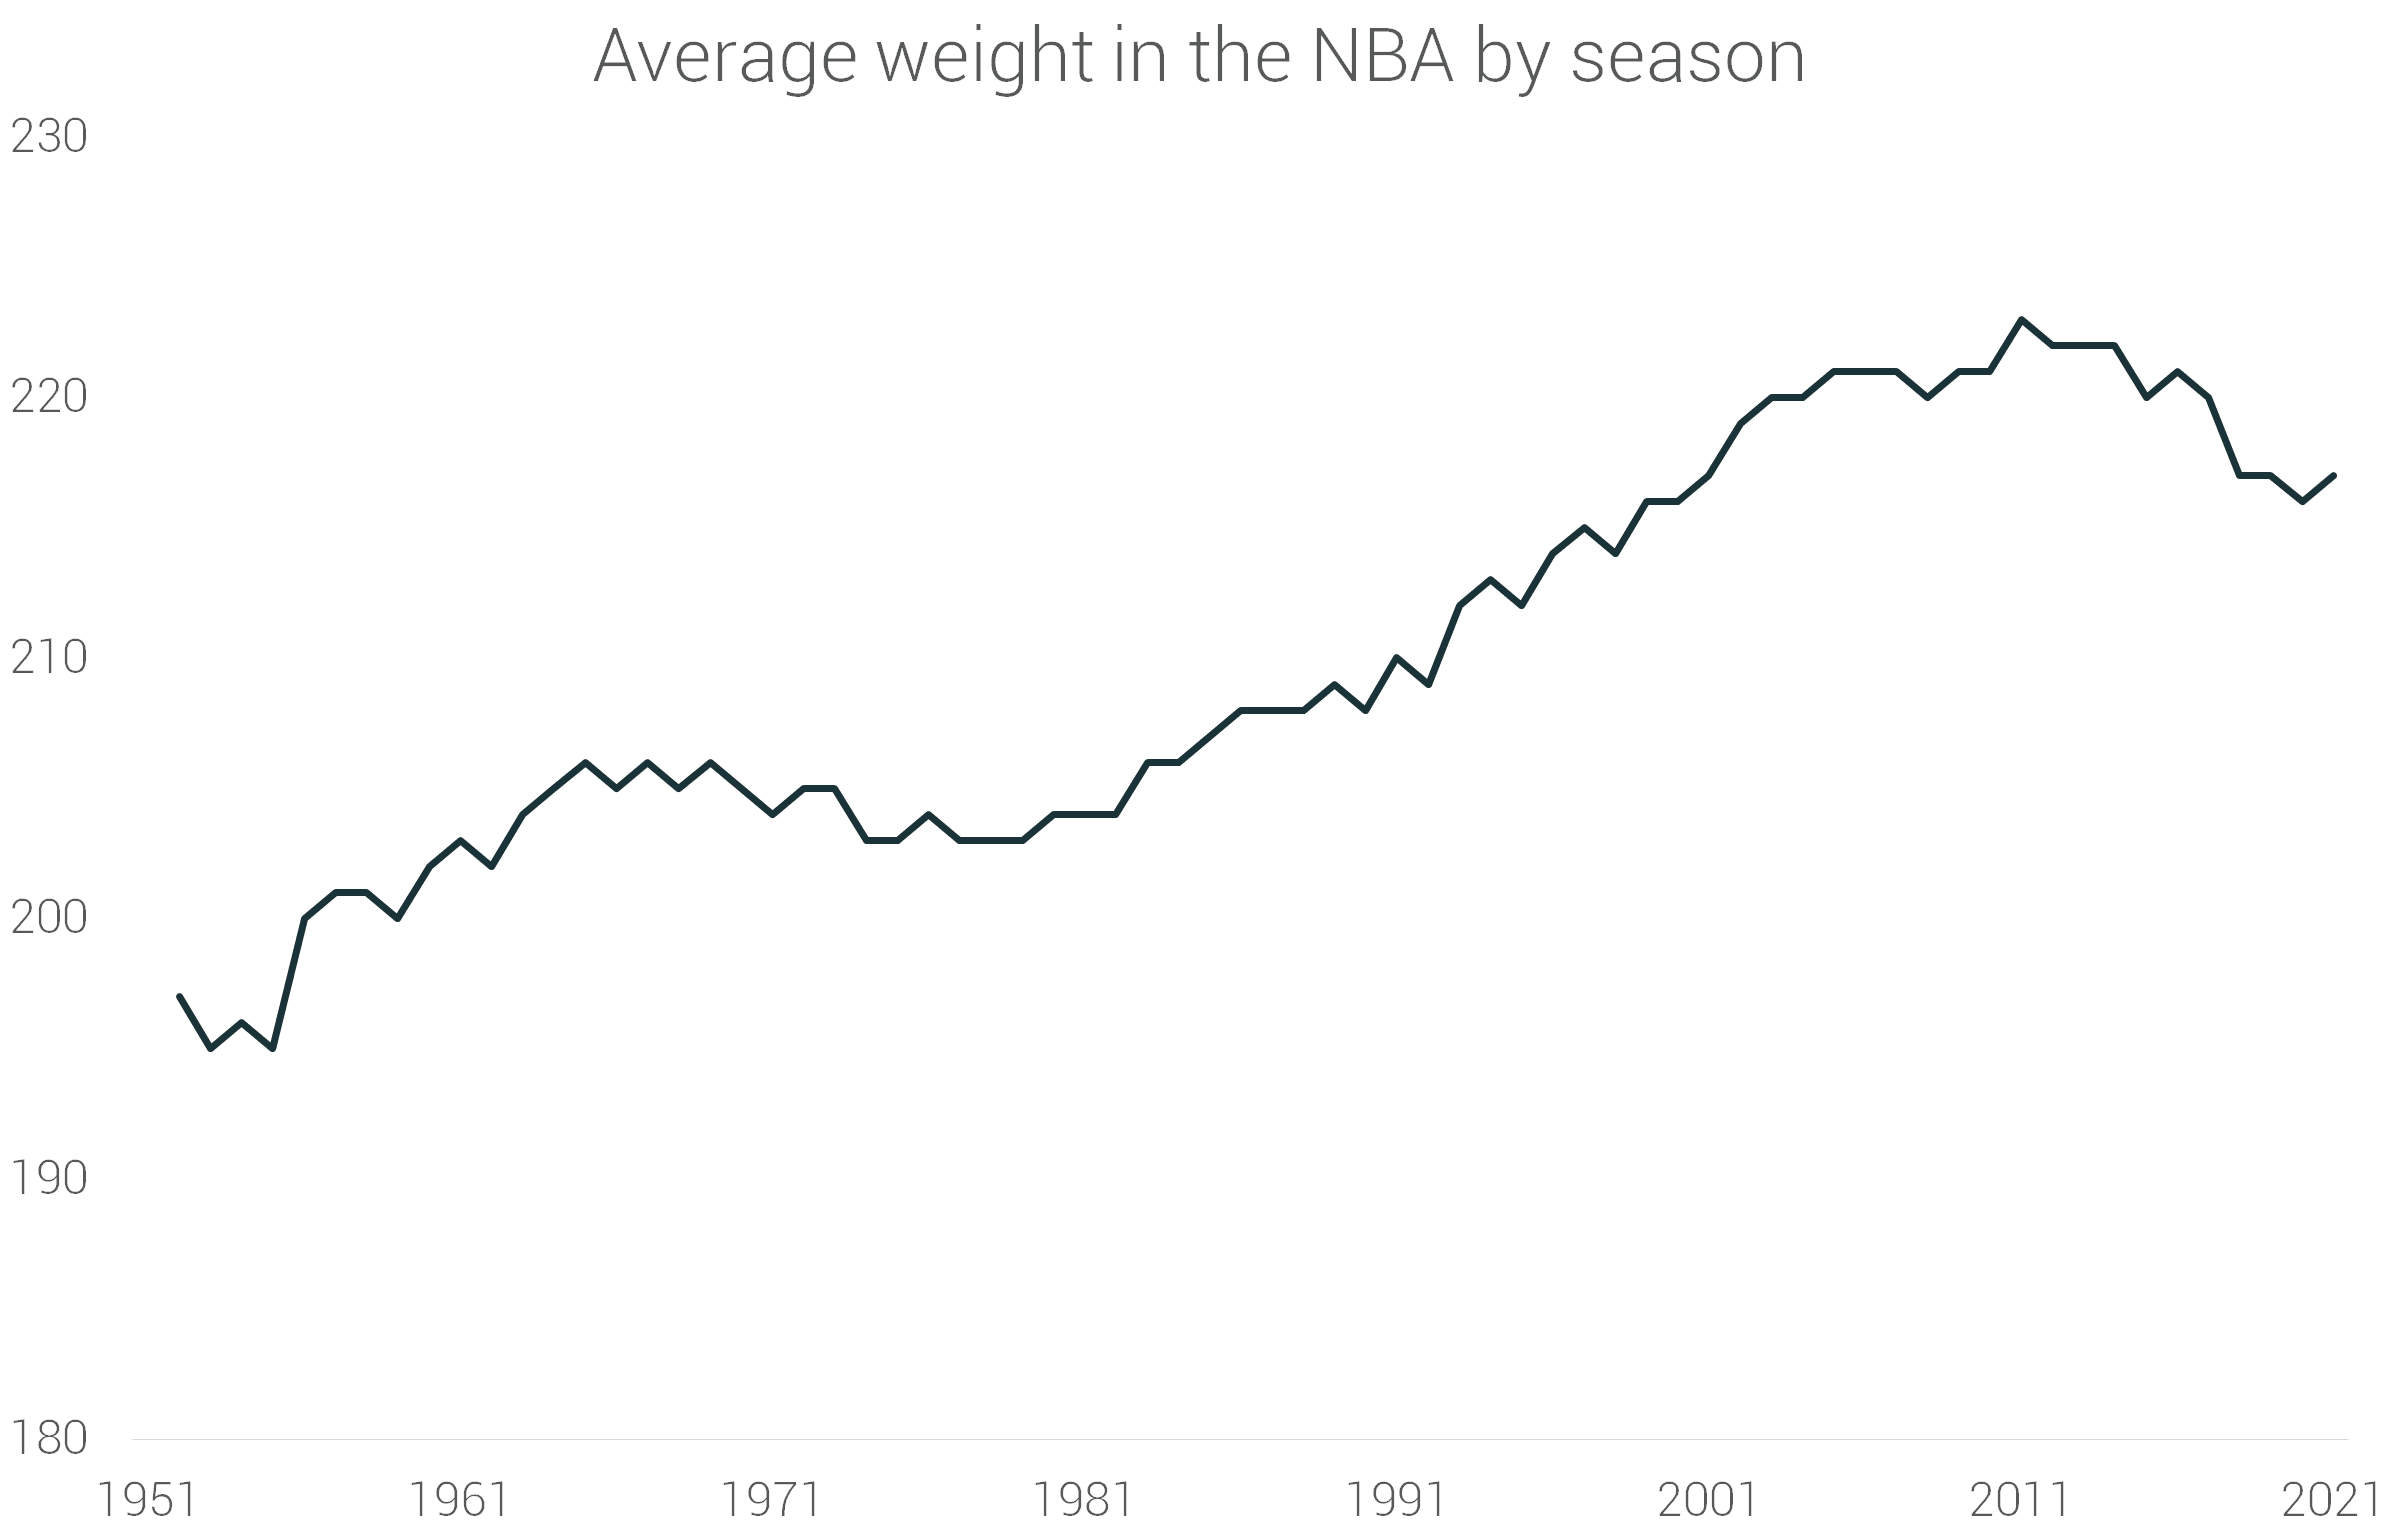 https://cdn.runrepeat.com/storage/uploads/research/Basketball/NBA%20Height%20Evolution/Average%20weight%20in%20the%20NBA.png